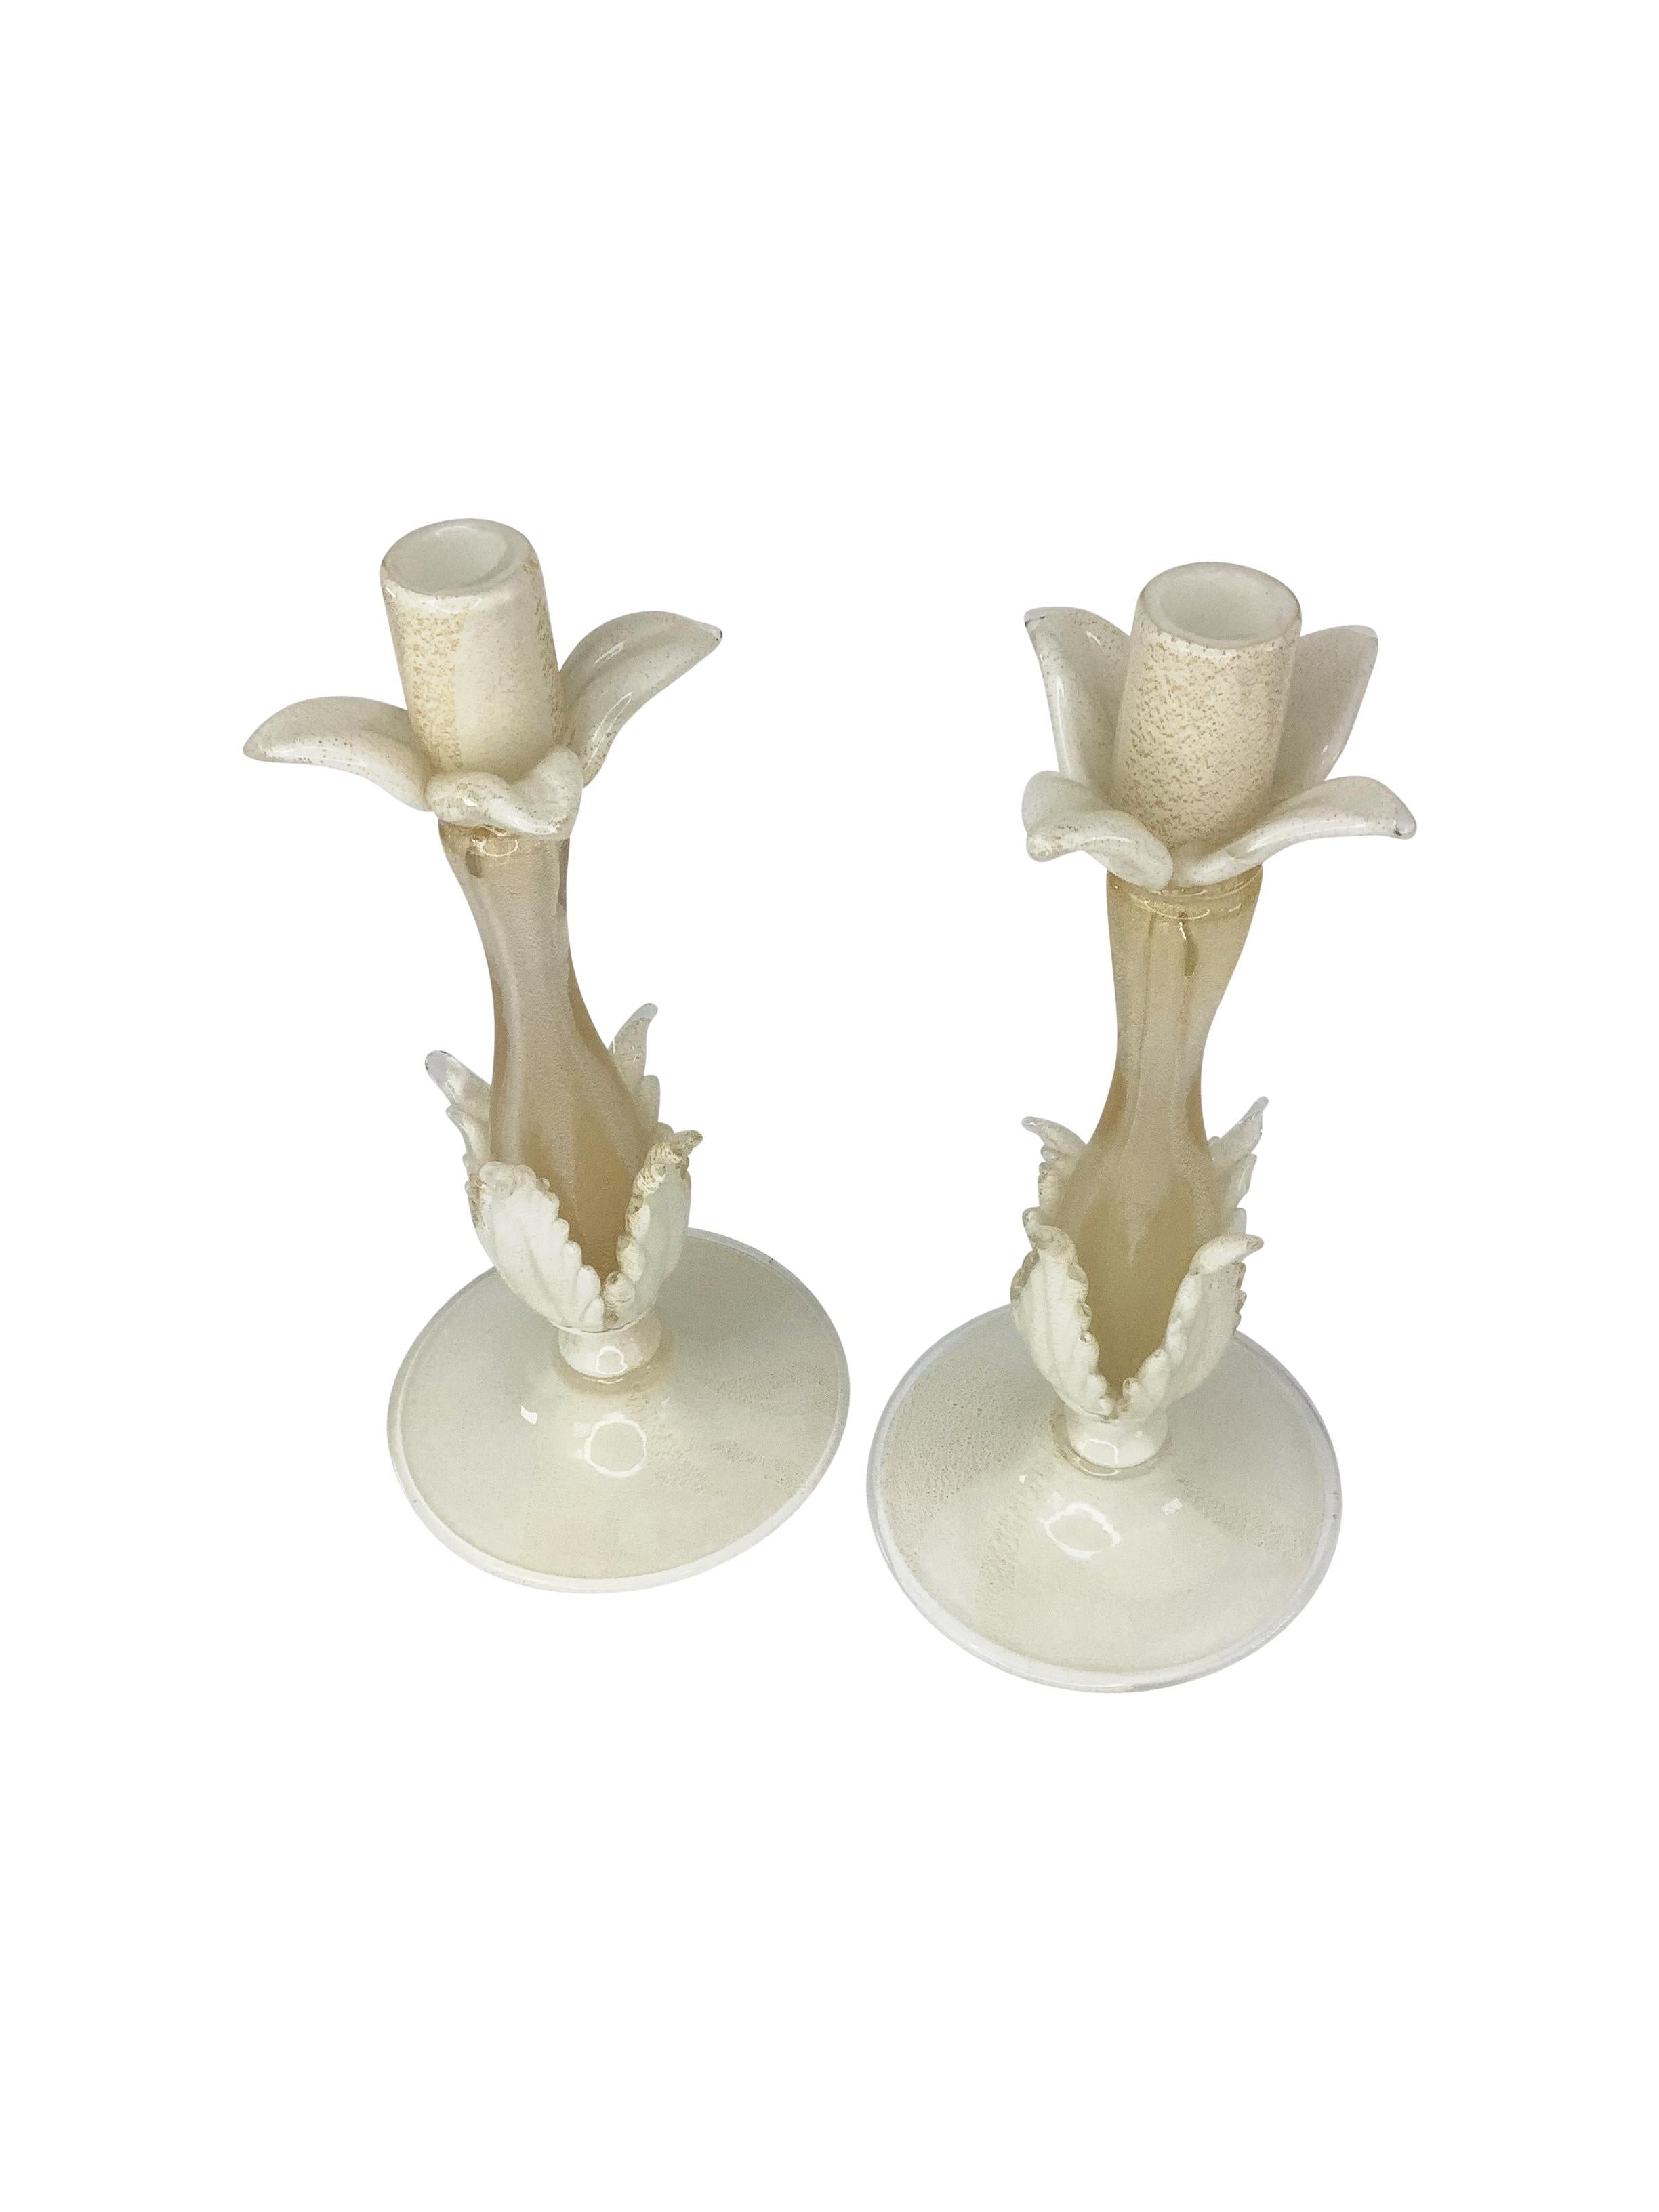 Mid-Century Modern Pair of Vintage Murano Glass Candlesticks attributed to Barovier & Toso